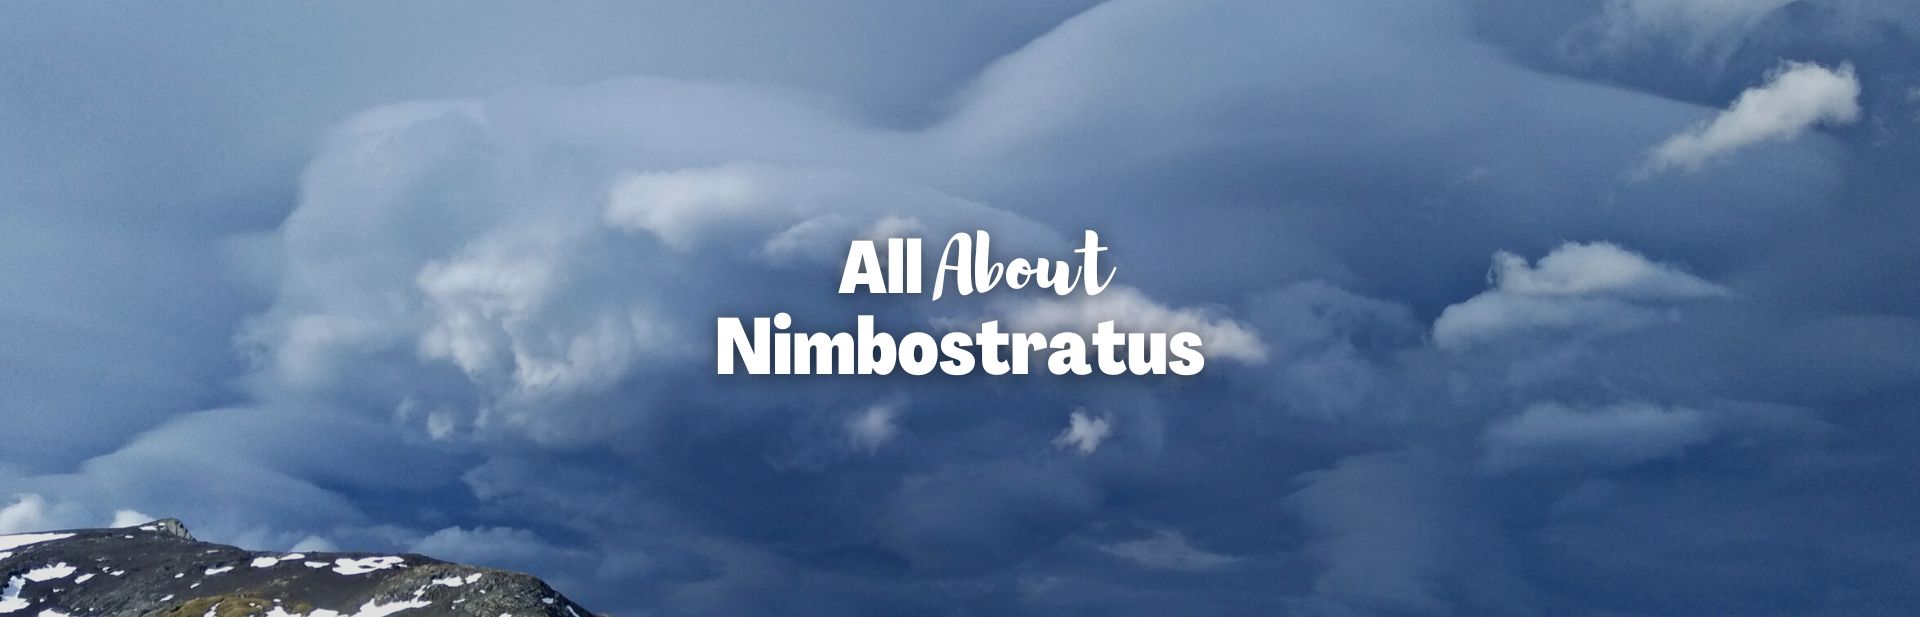 Nimbostratus Clouds: Have You Ever Seen the Rain?